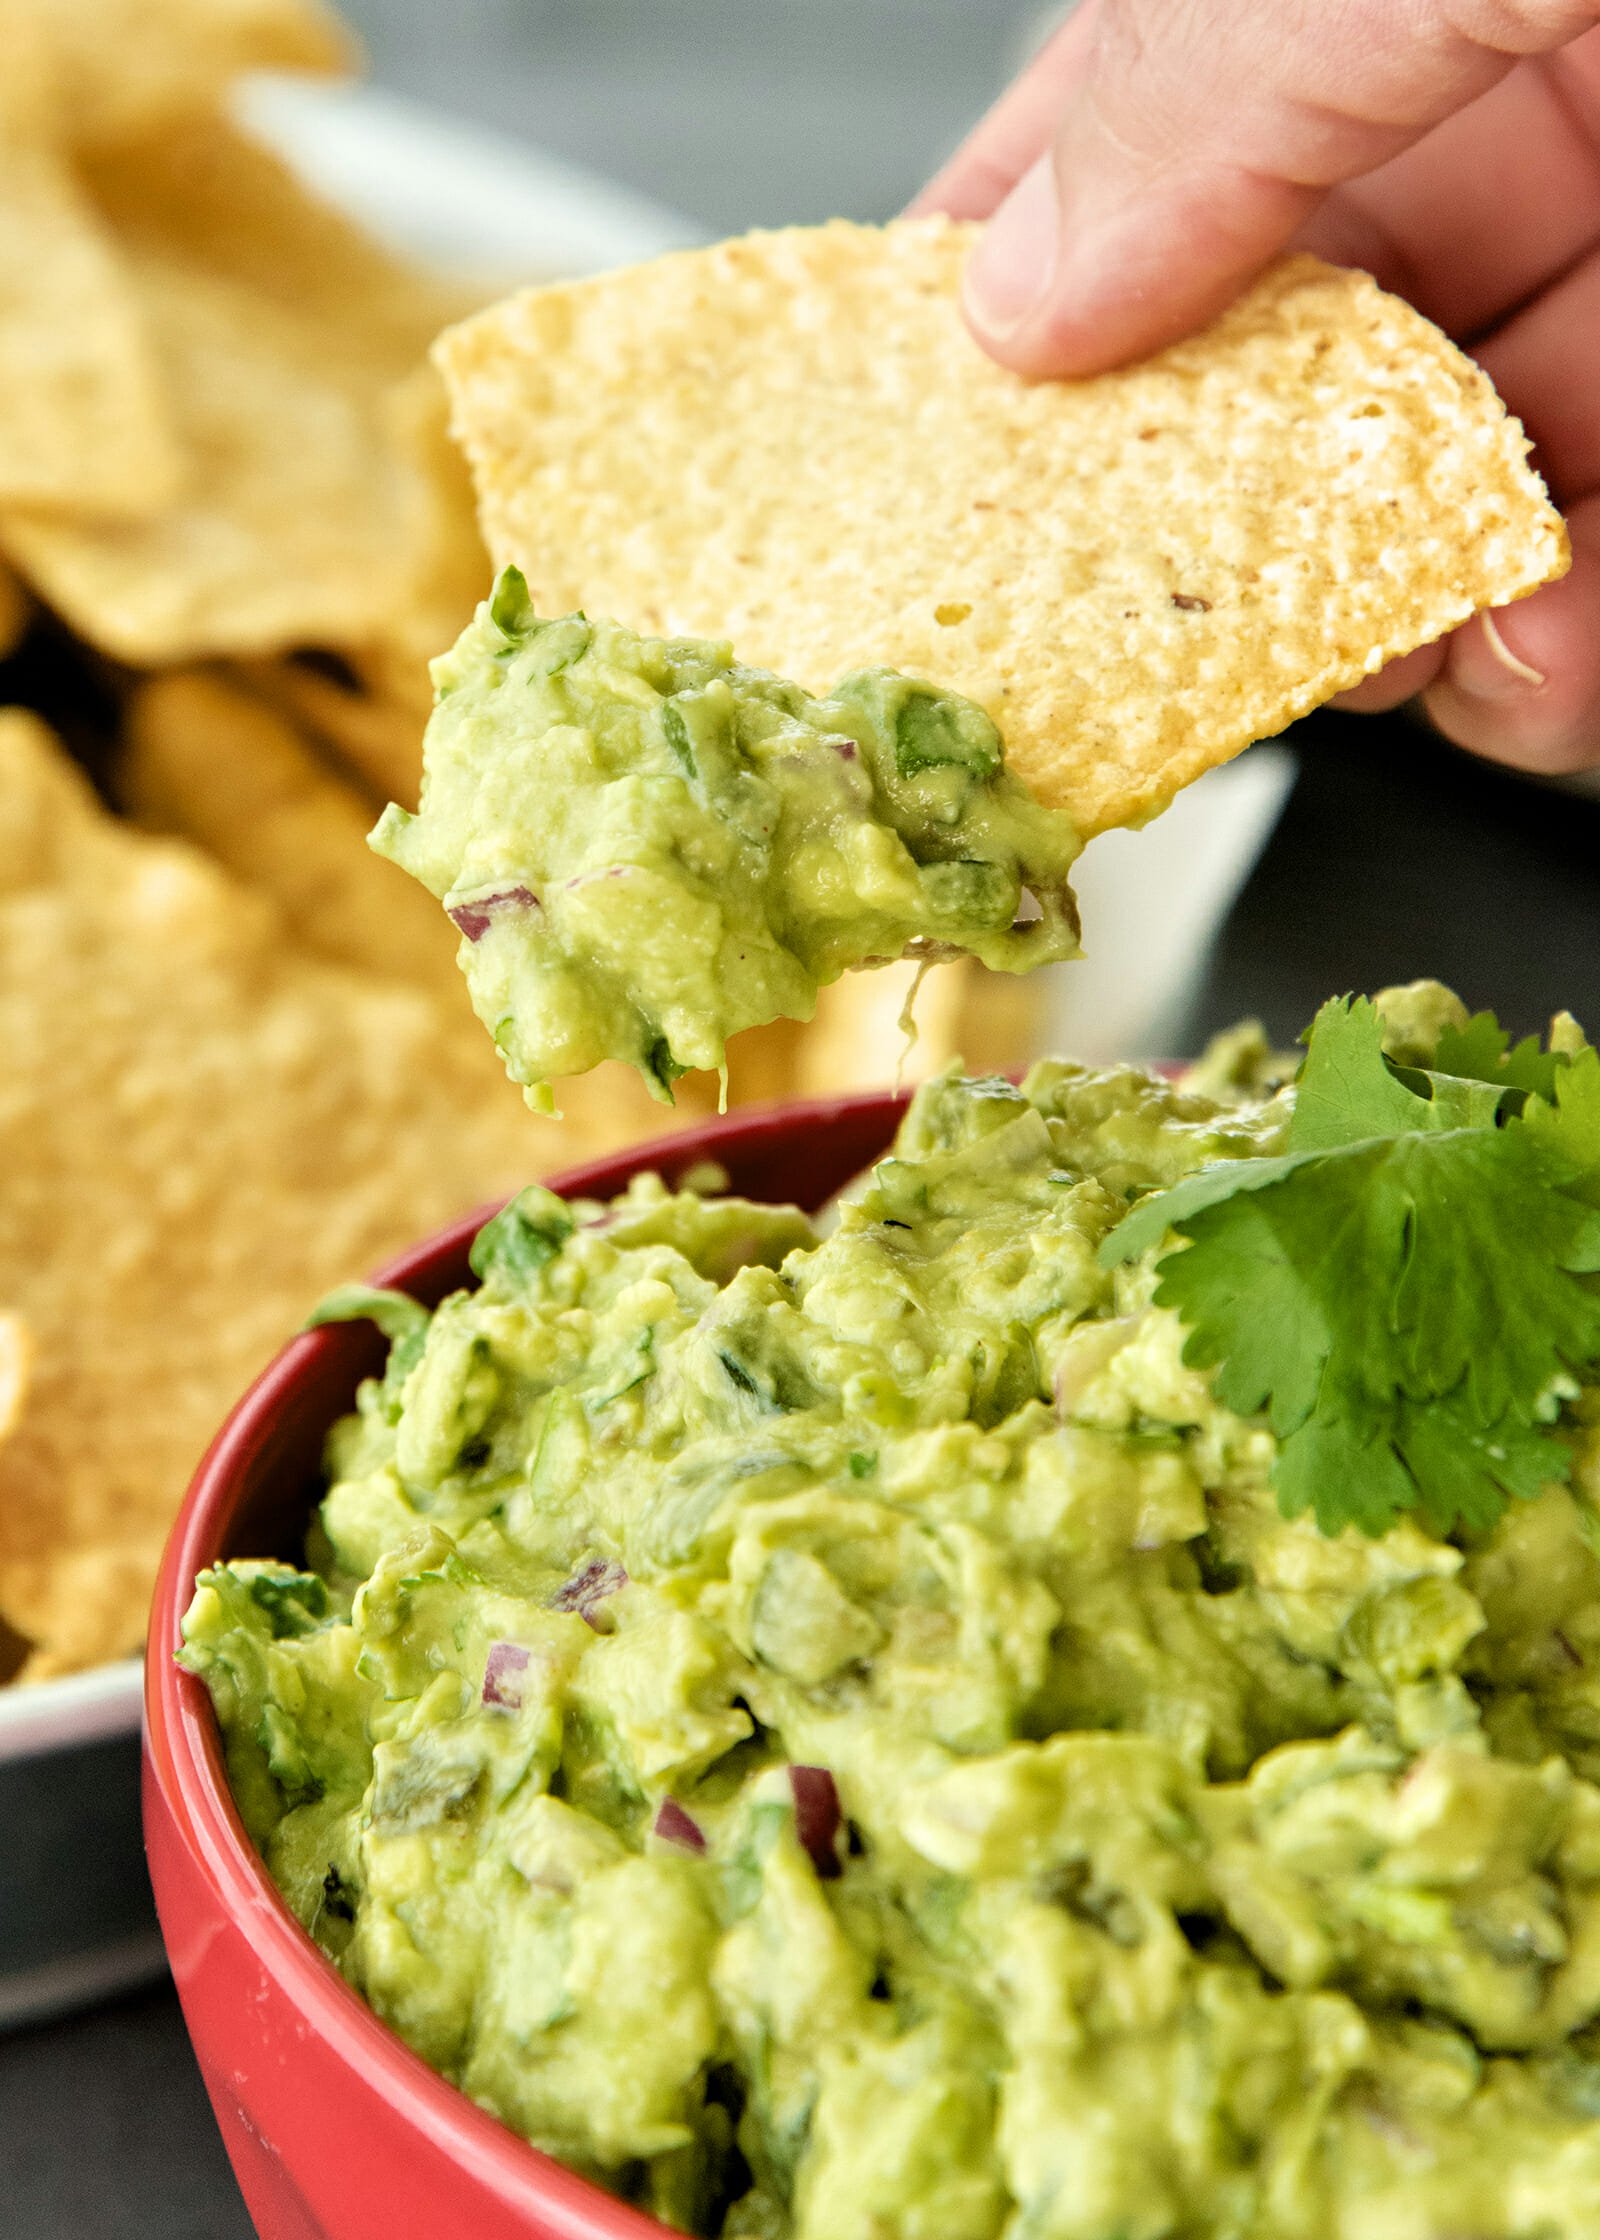 How to Make Homemade Guacamole - guacamole in a bowl wtih chips on the side